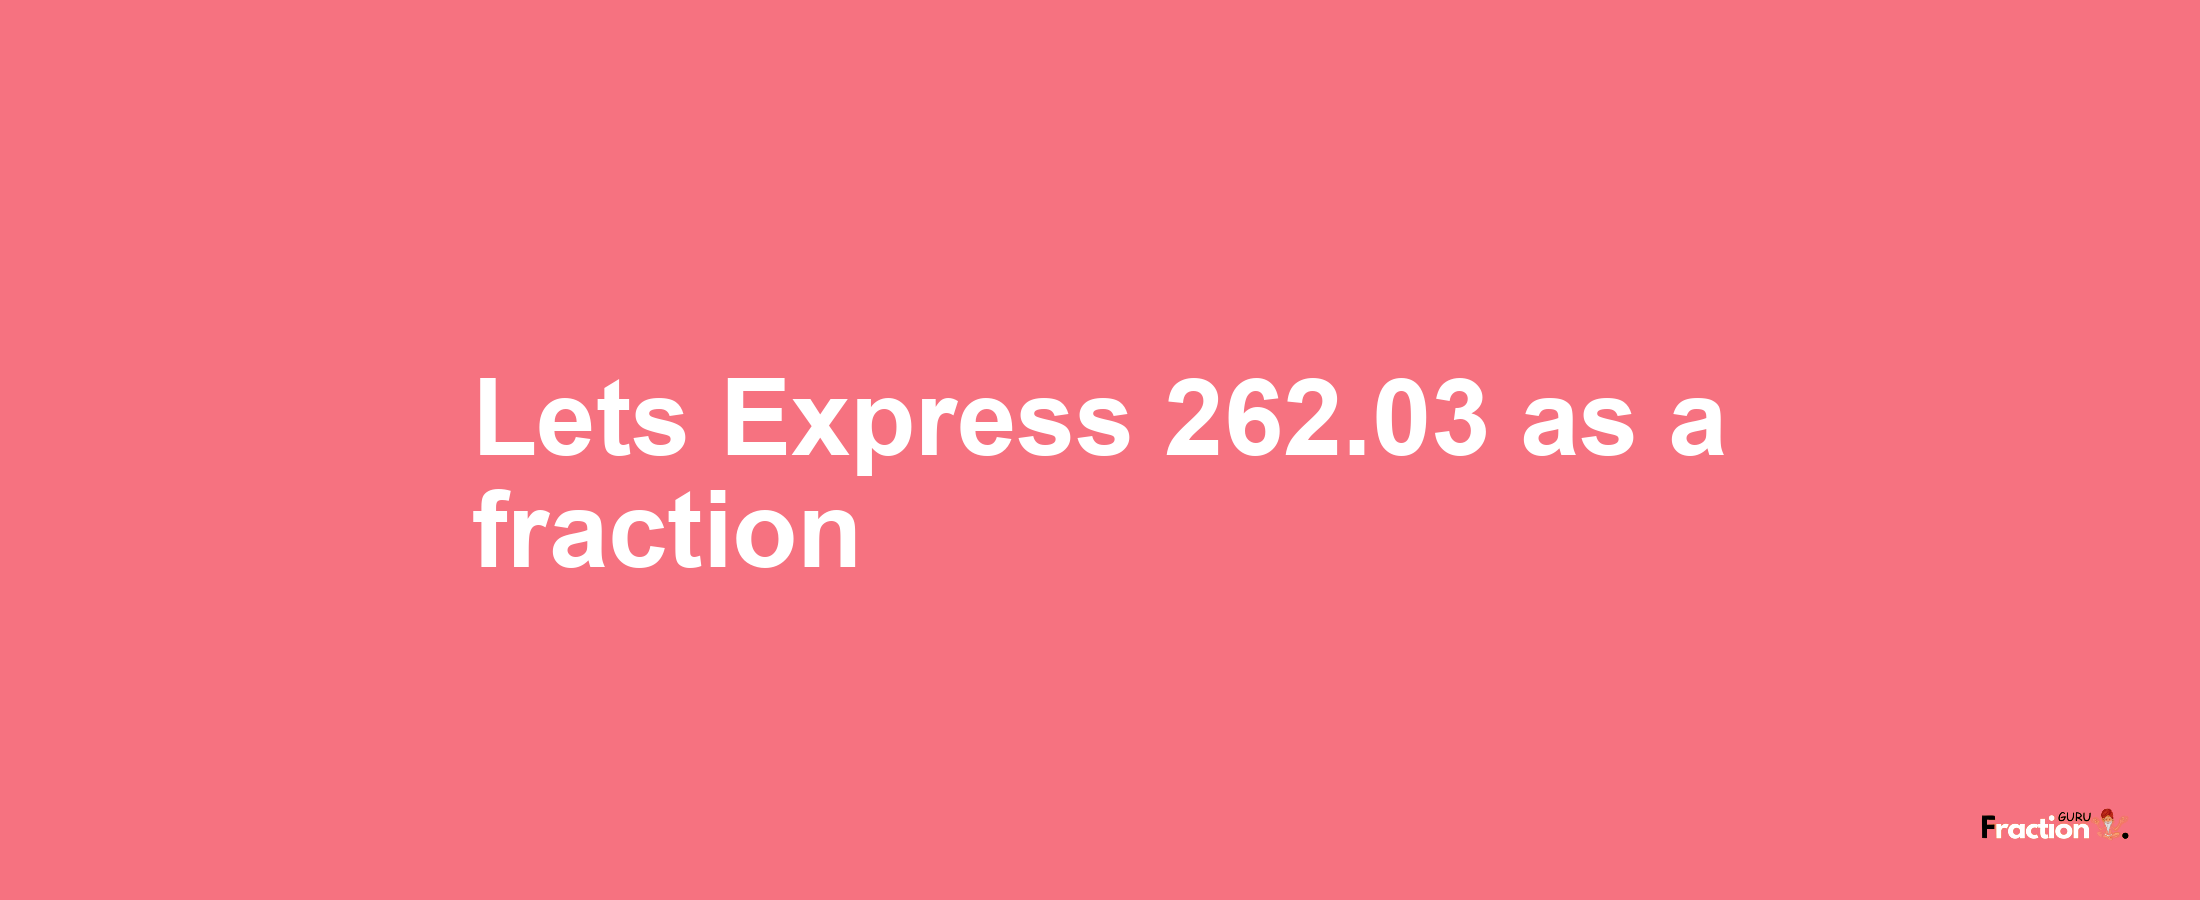 Lets Express 262.03 as afraction